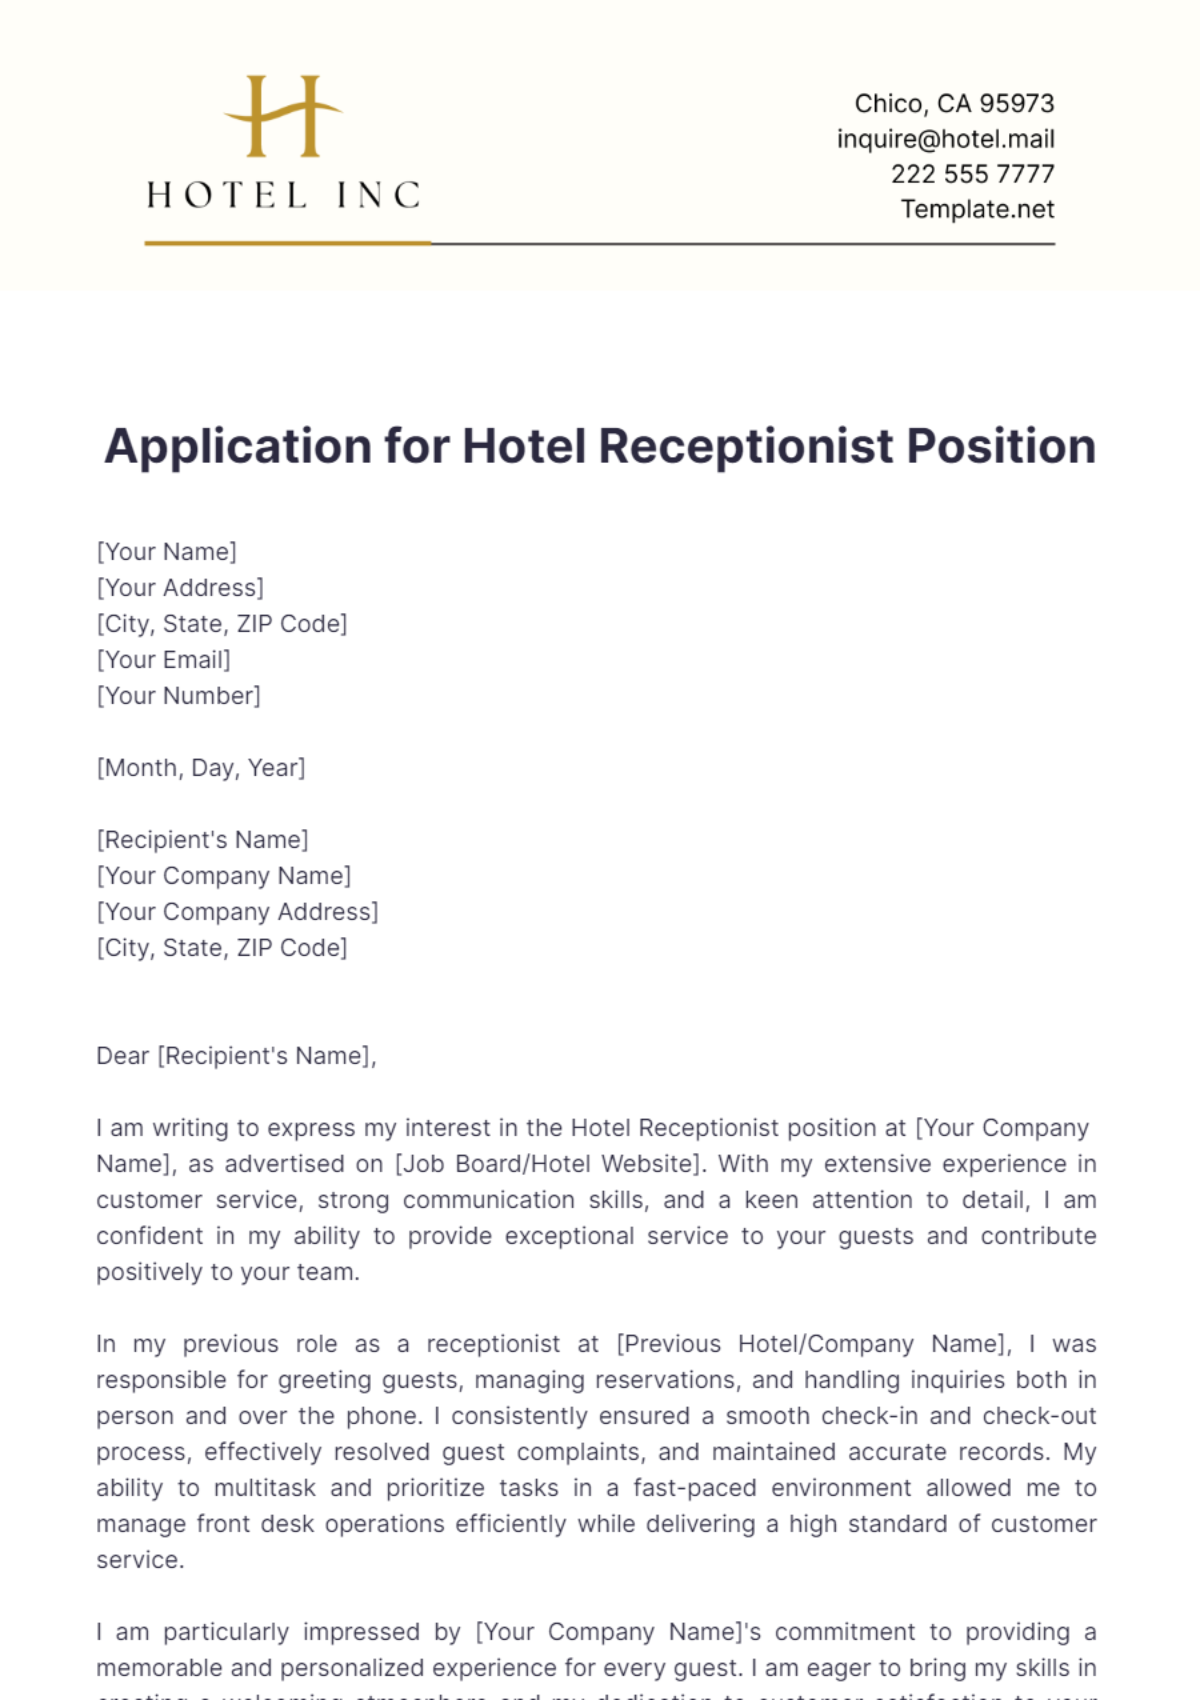 Hotel Receptionist Cover Letter Template